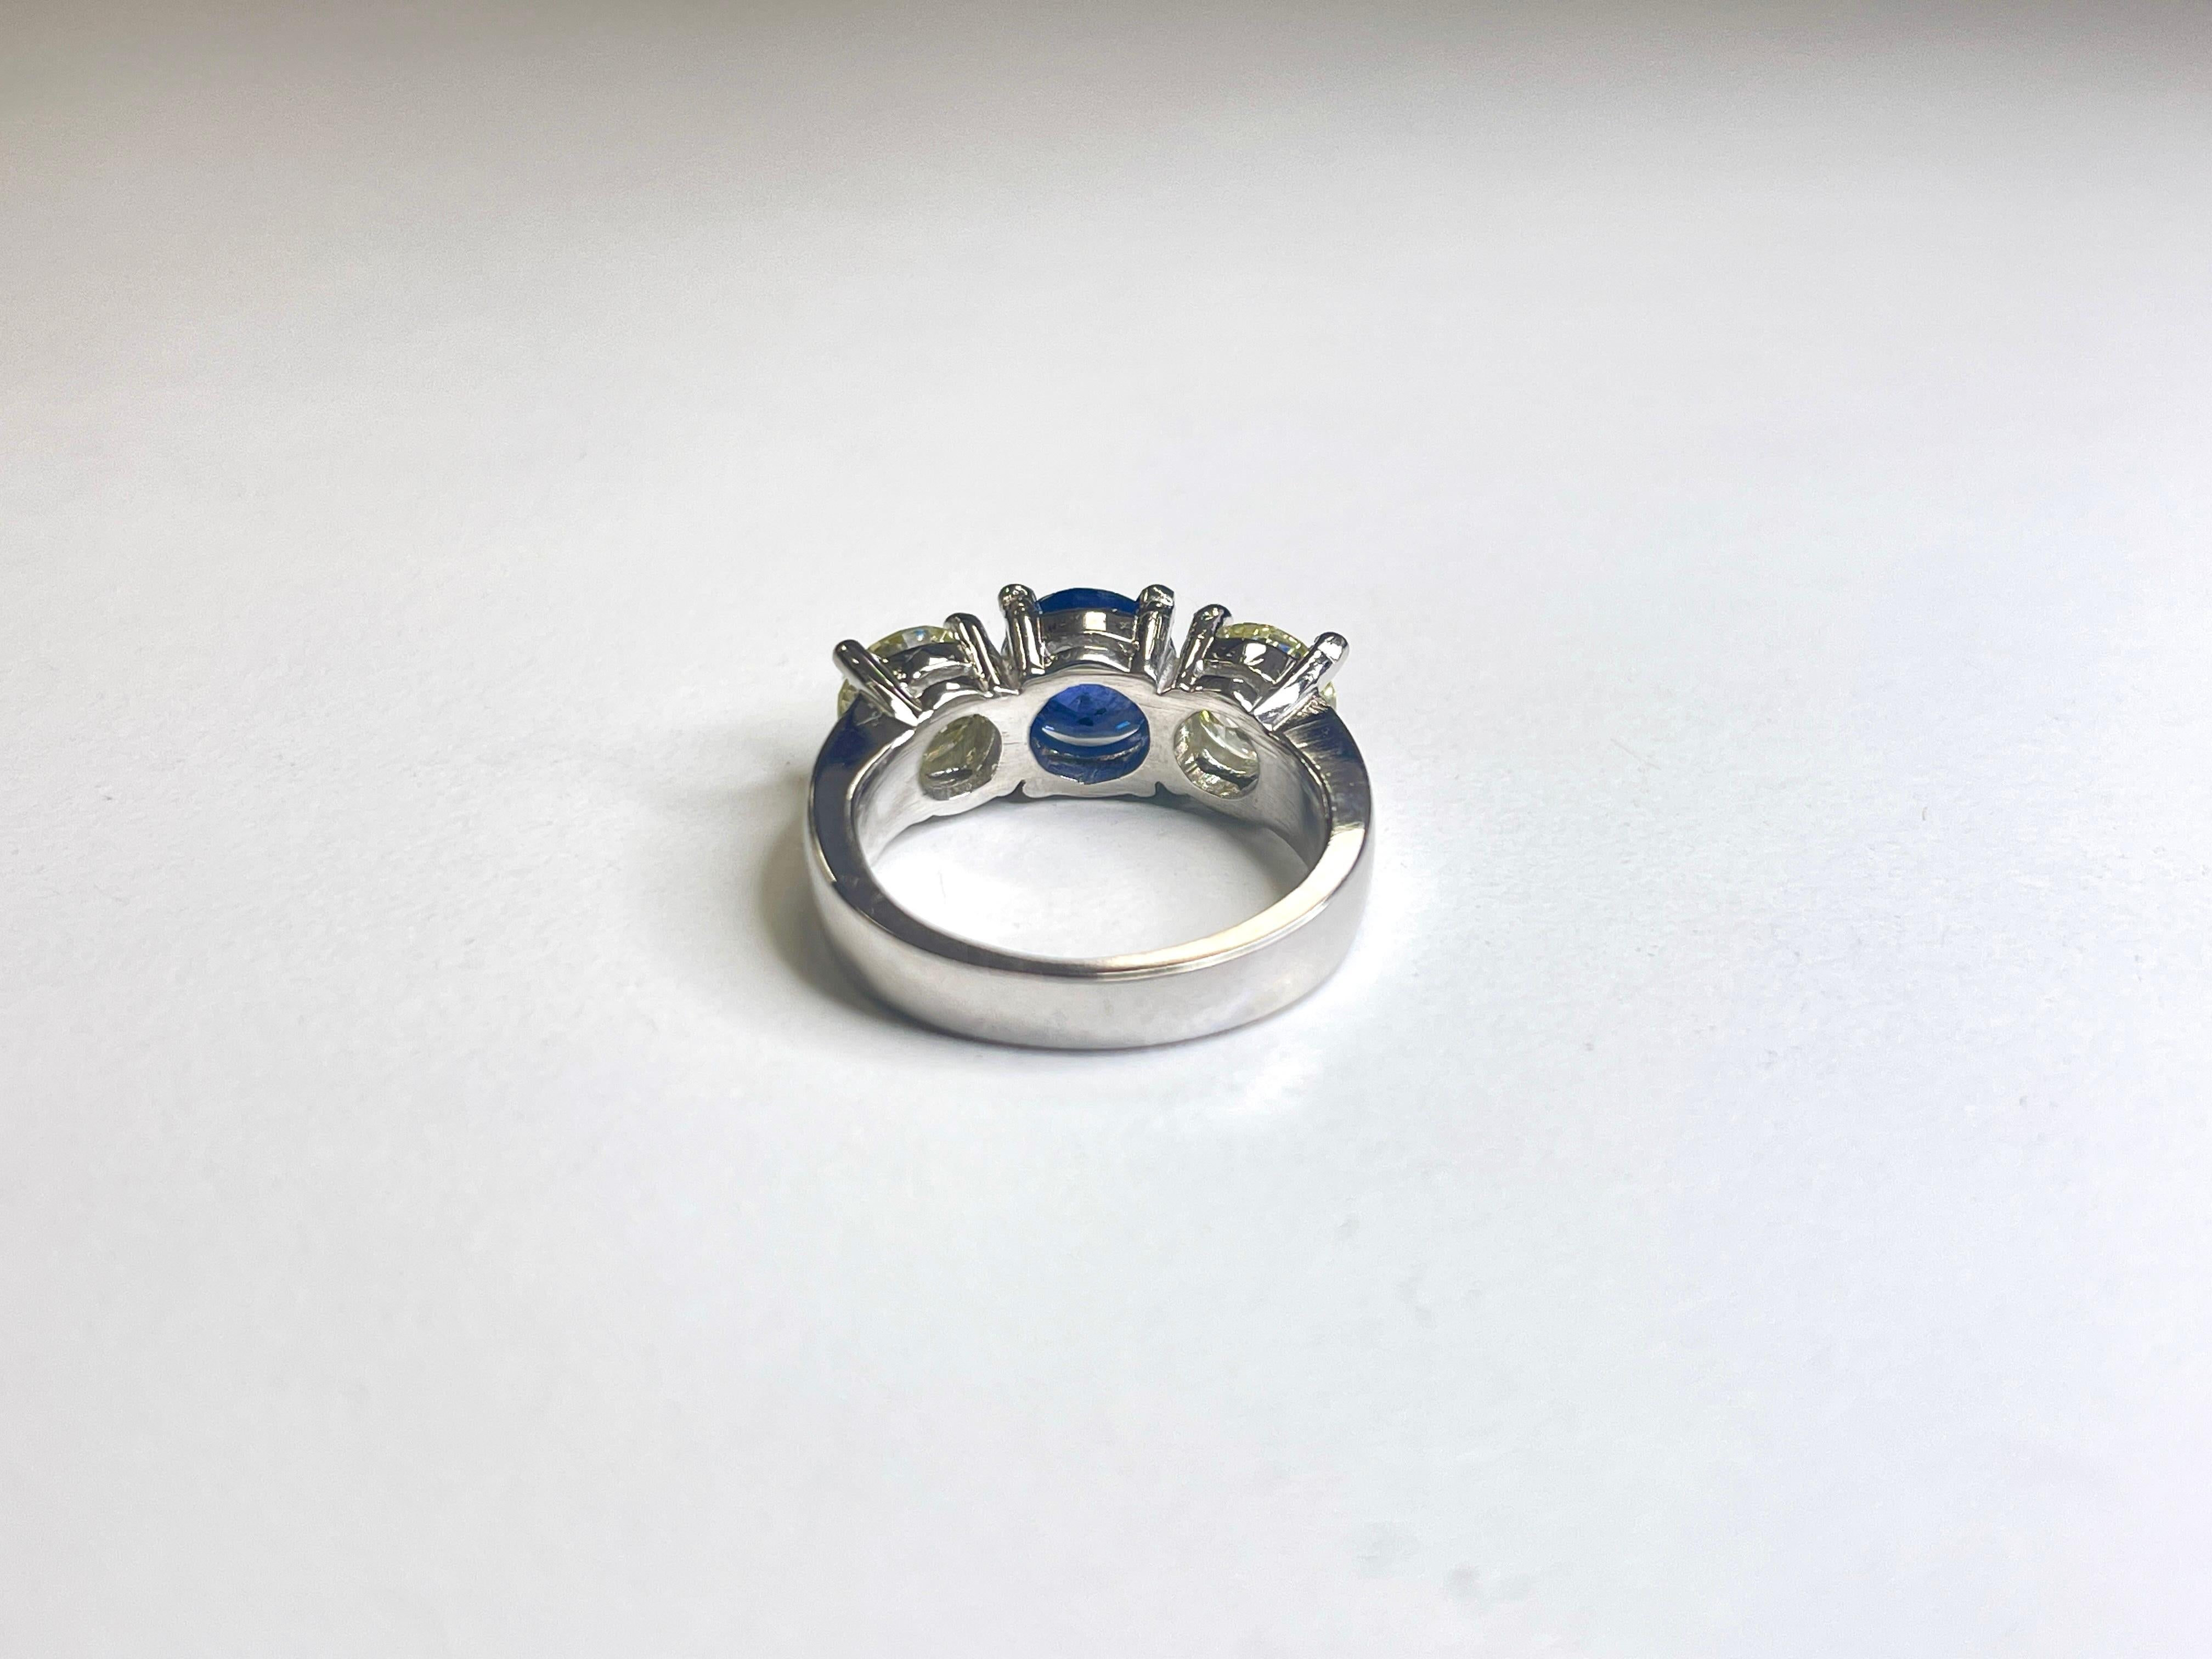 2.09 Carat All Natural Diamond 0.35 Carat Natural Sapphire 14K White Gold Ring For Sale 1